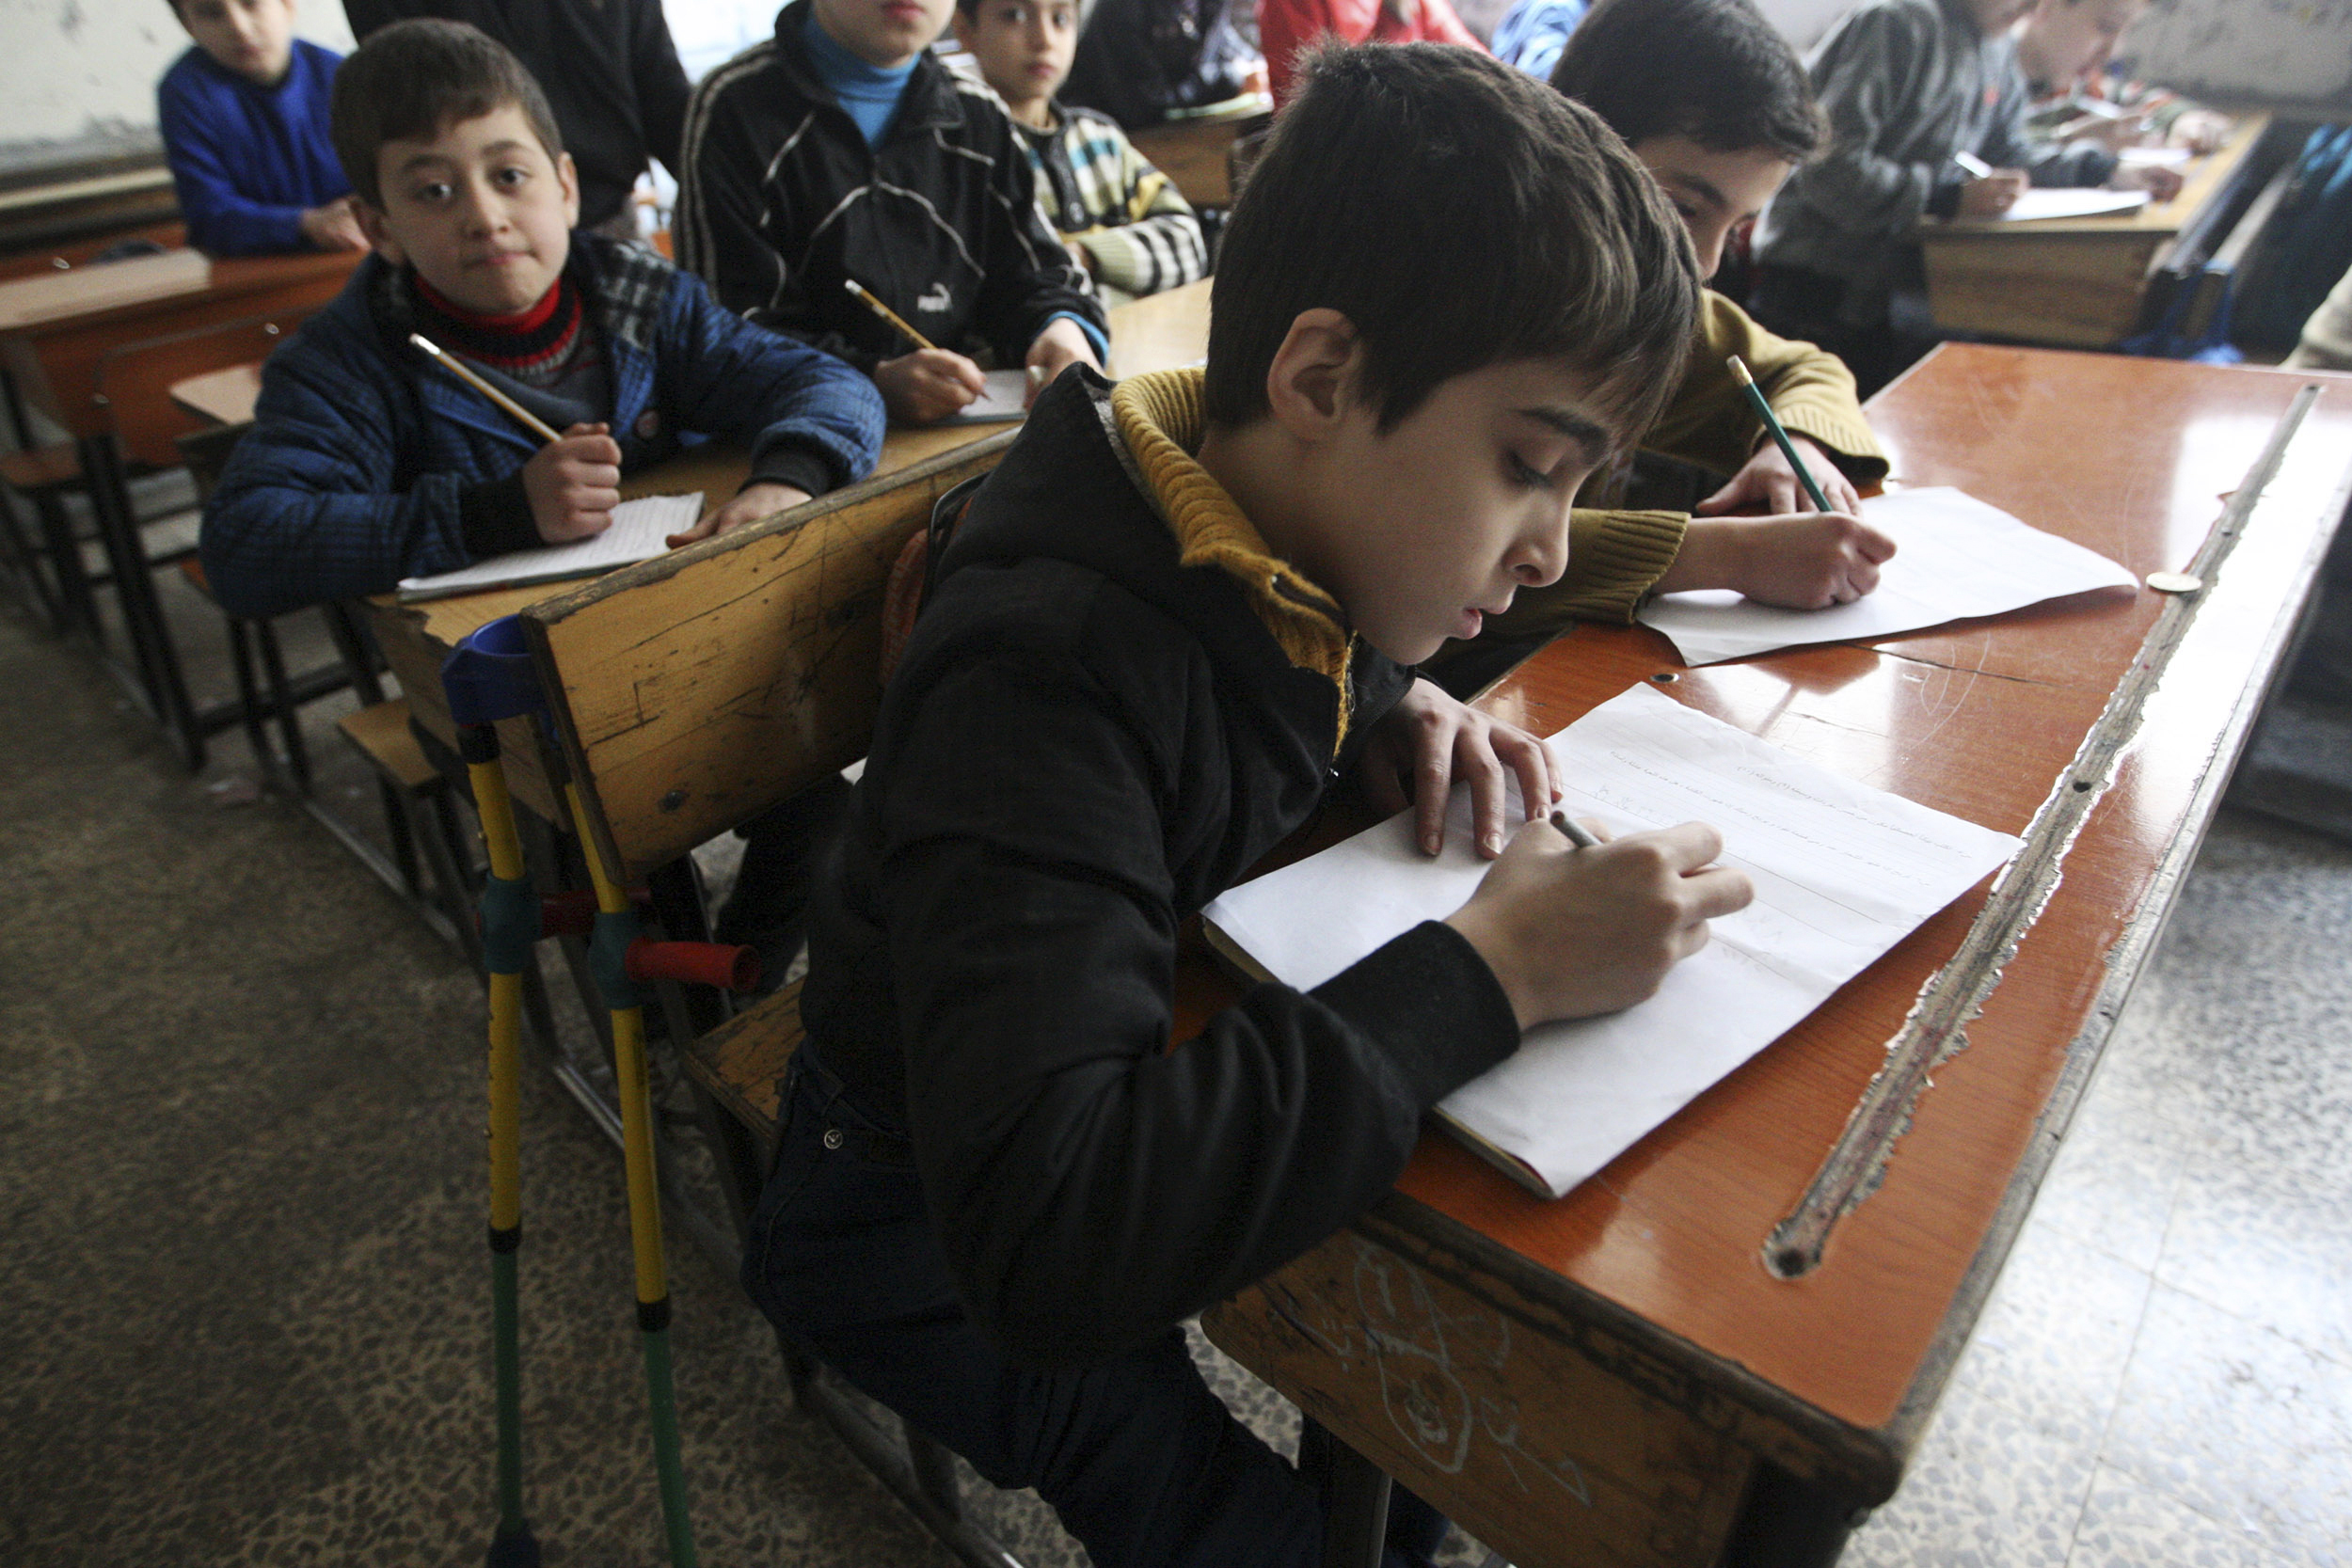 Disabled 11-year-old boy Abdel Jaleel al-Homsy attends a class in Aleppo's Bustan al-Qasr March 12, 2014. Homsy, who was wounded and disabled in 2012 by shelling from forces loyal to Syria's President Bashar al-Assad, has decided to go back to school despite his injuries - helped by Qanawati who accompanies him everywhere. REUTERS/Aref Alkrez    (SYRIA - Tags: POLITICS CIVIL UNREST CONFLICT) - GM1EA3D025Z01